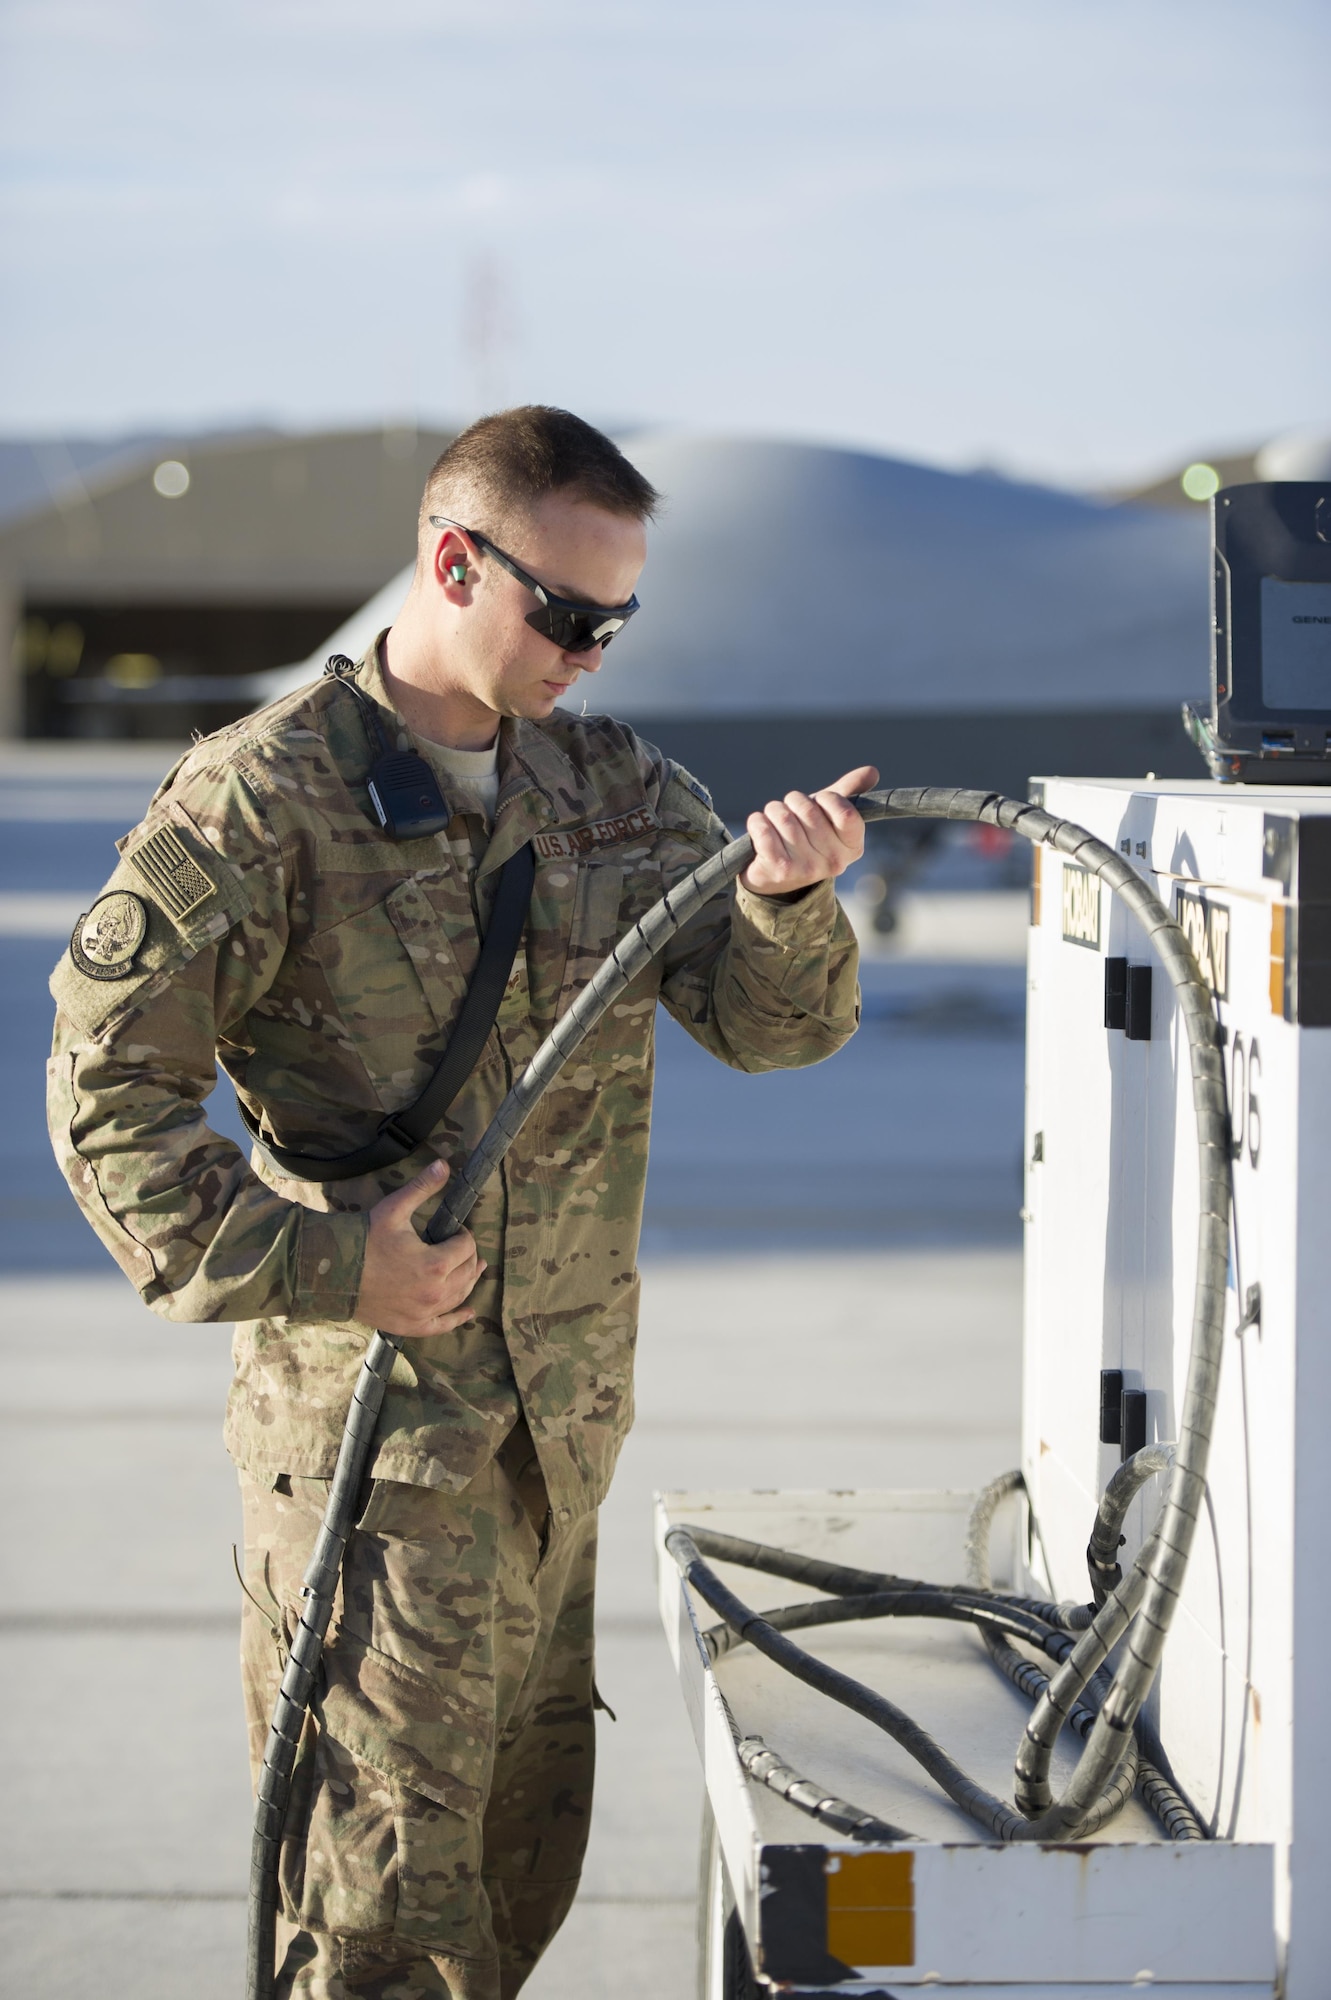 Airman 1st Class Tyler, 62nd Expeditionary Reconnaissance Squadron crew chief puts away a power cord after conducting preflight checks on an MQ-9 Reaper prior to a sortie at Kandahar Airfield, Afghanistan, Dec. 5, 2015. The Reaper is an armed, multi-mission, medium-altitude, long-endurance remotely piloted aircraft that is employed primarily as an intelligence-collection asset and secondarily against dynamic execution targets. (U.S. Air Force photo by Tech. Sgt. Robert Cloys/Released)